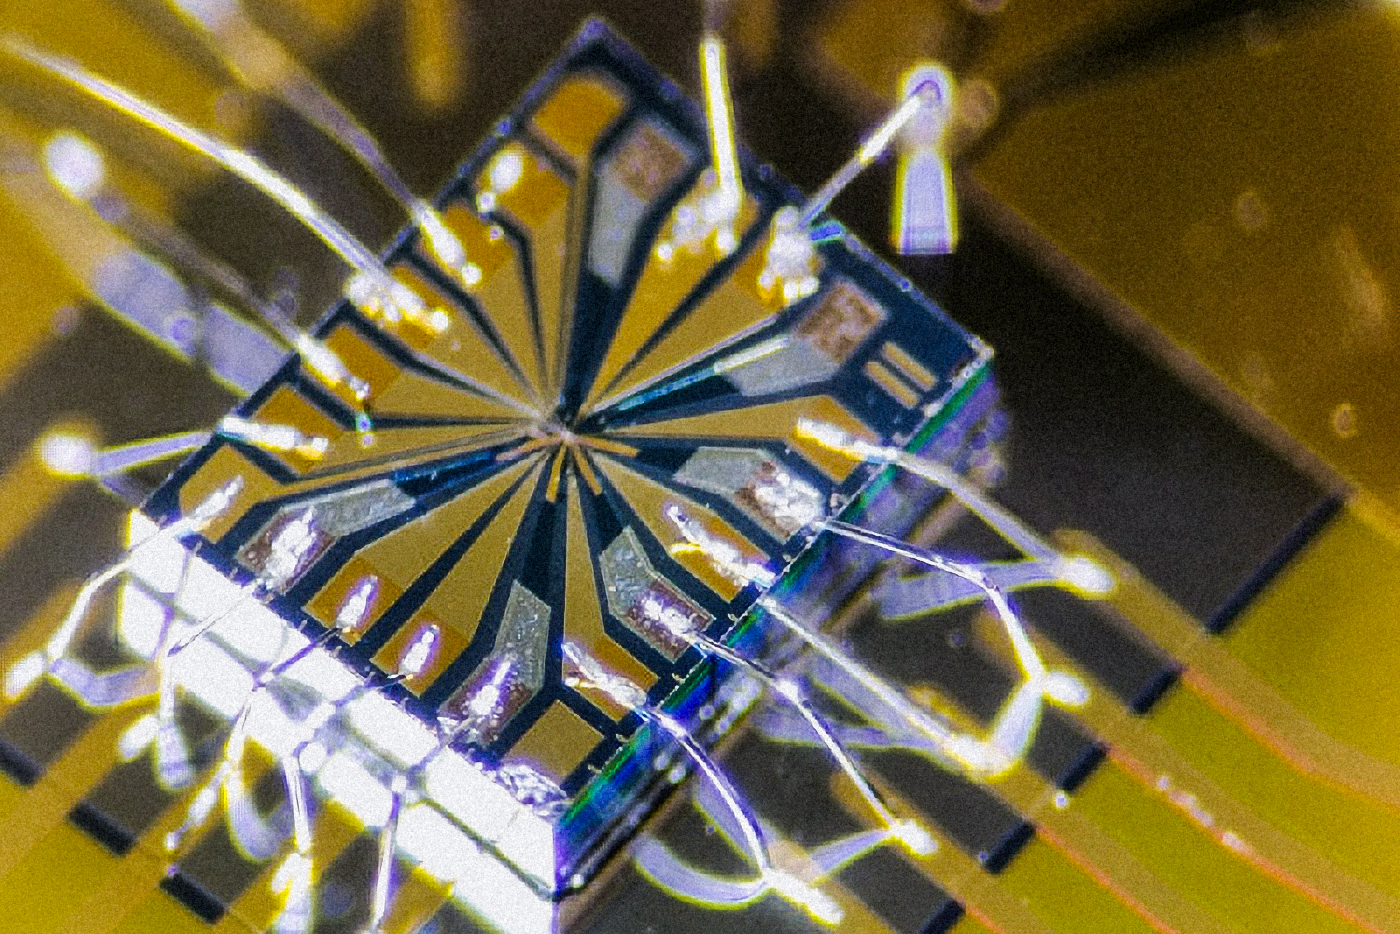 Close-up of a computer chip with integrated circuits.